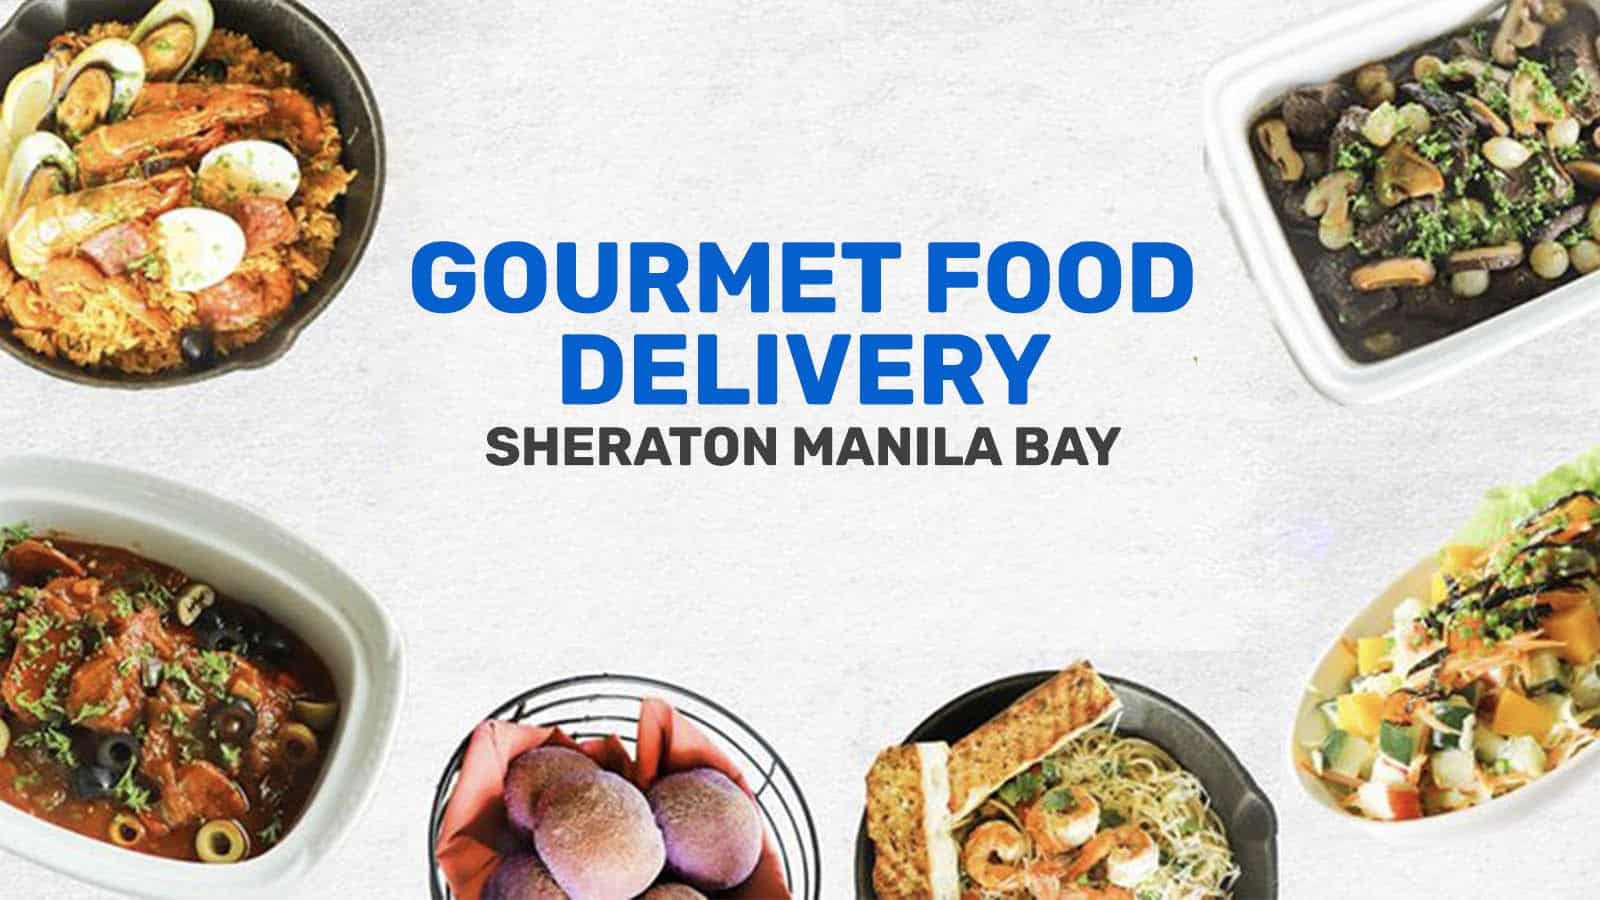 SHERATON MANILA BAY: Gourmet Food Delivery Menu & How to Order